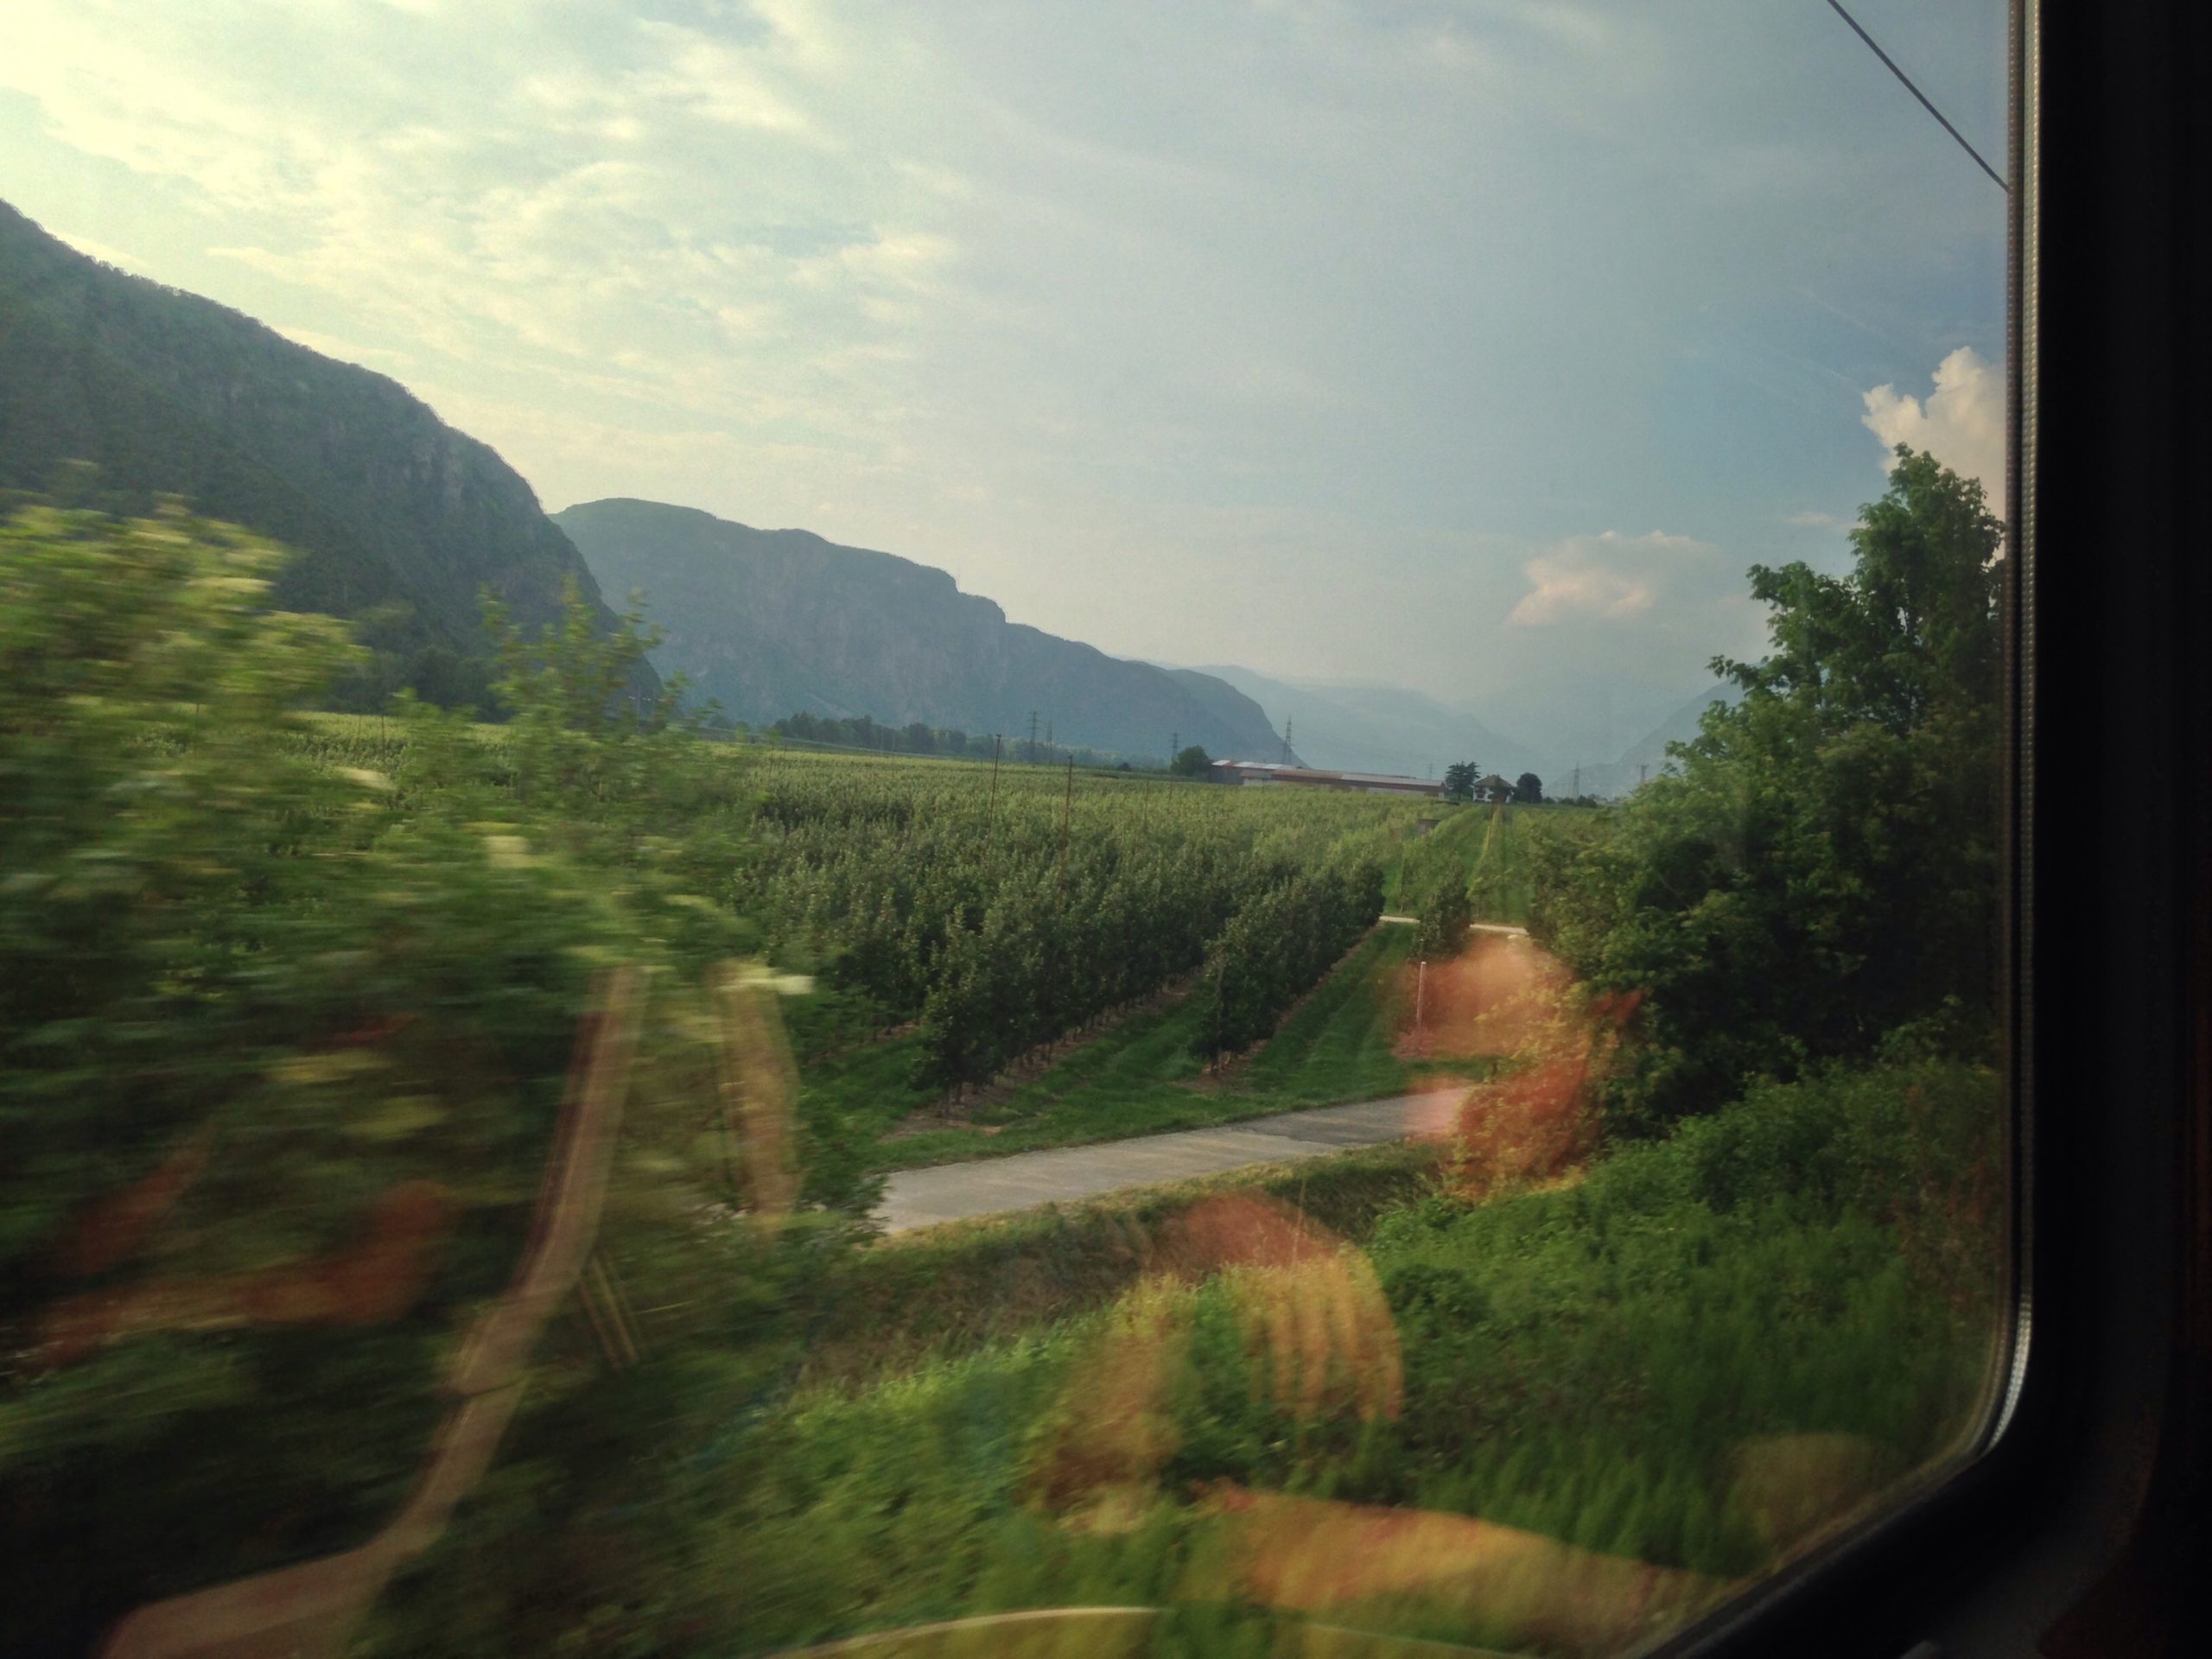 One of the most beautiful train rides there is